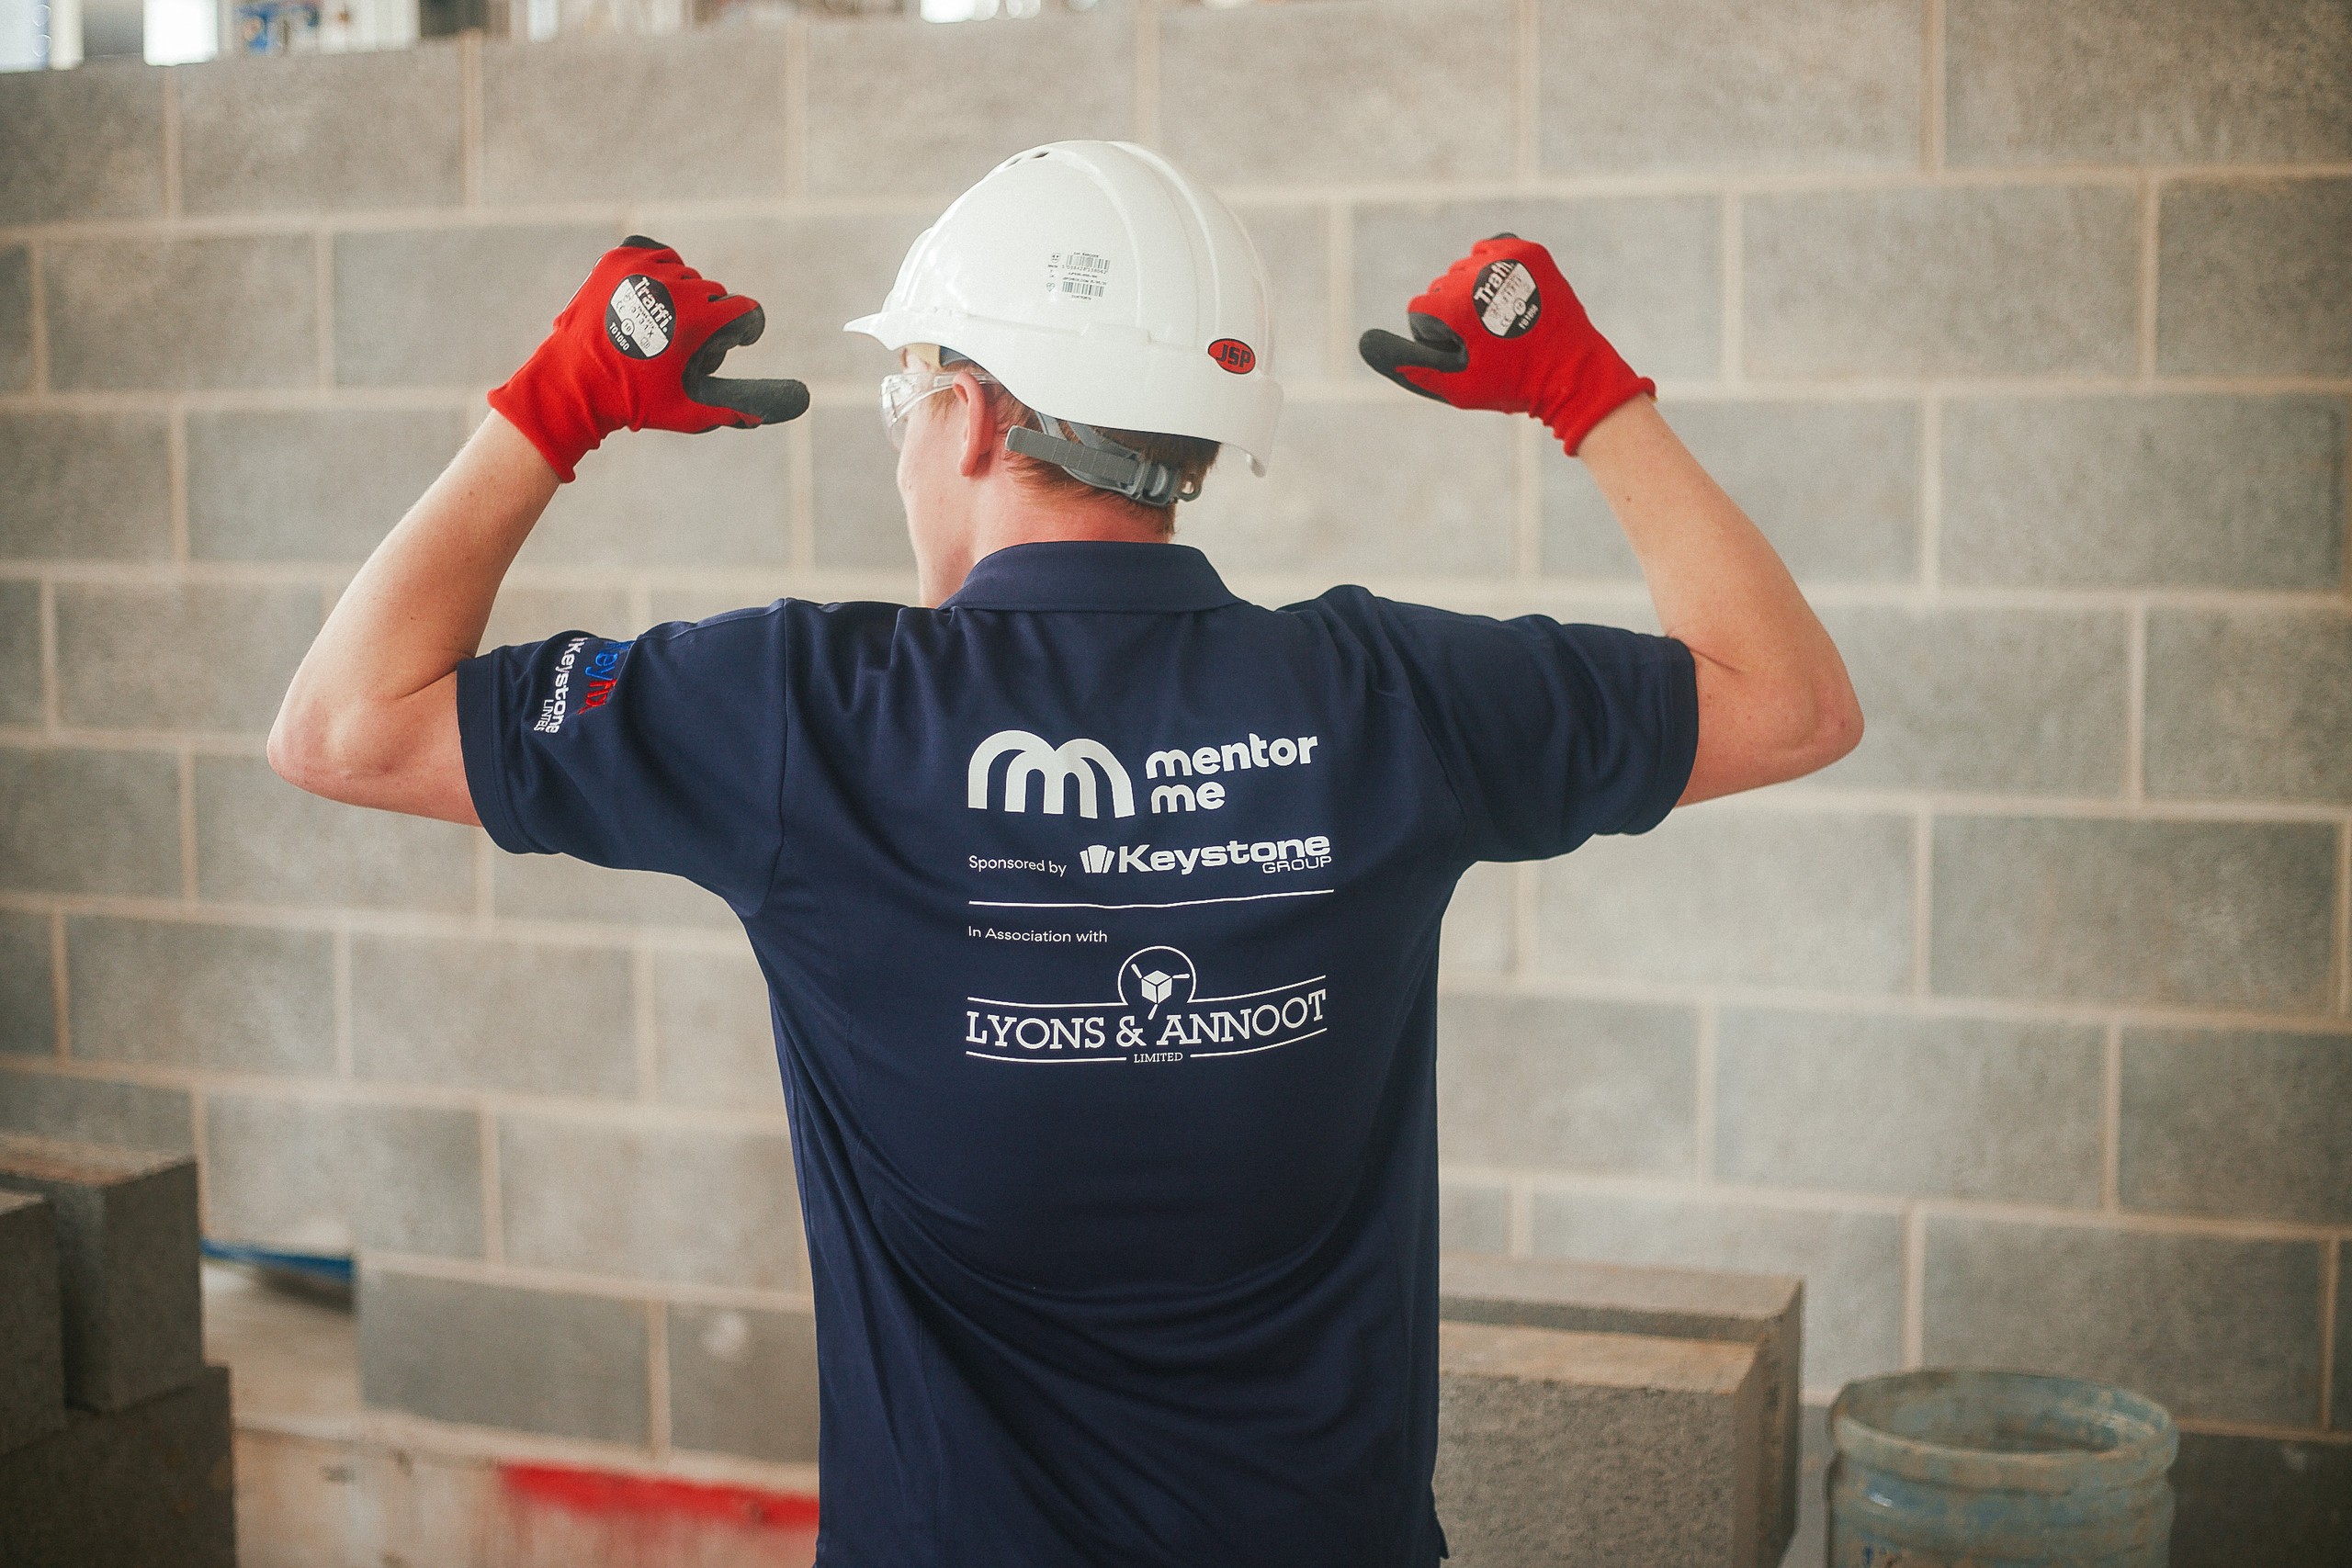 Keystone Group brands fund ‘Mentor Me’ Apprentice Programme to advance skills of young Bricklayers